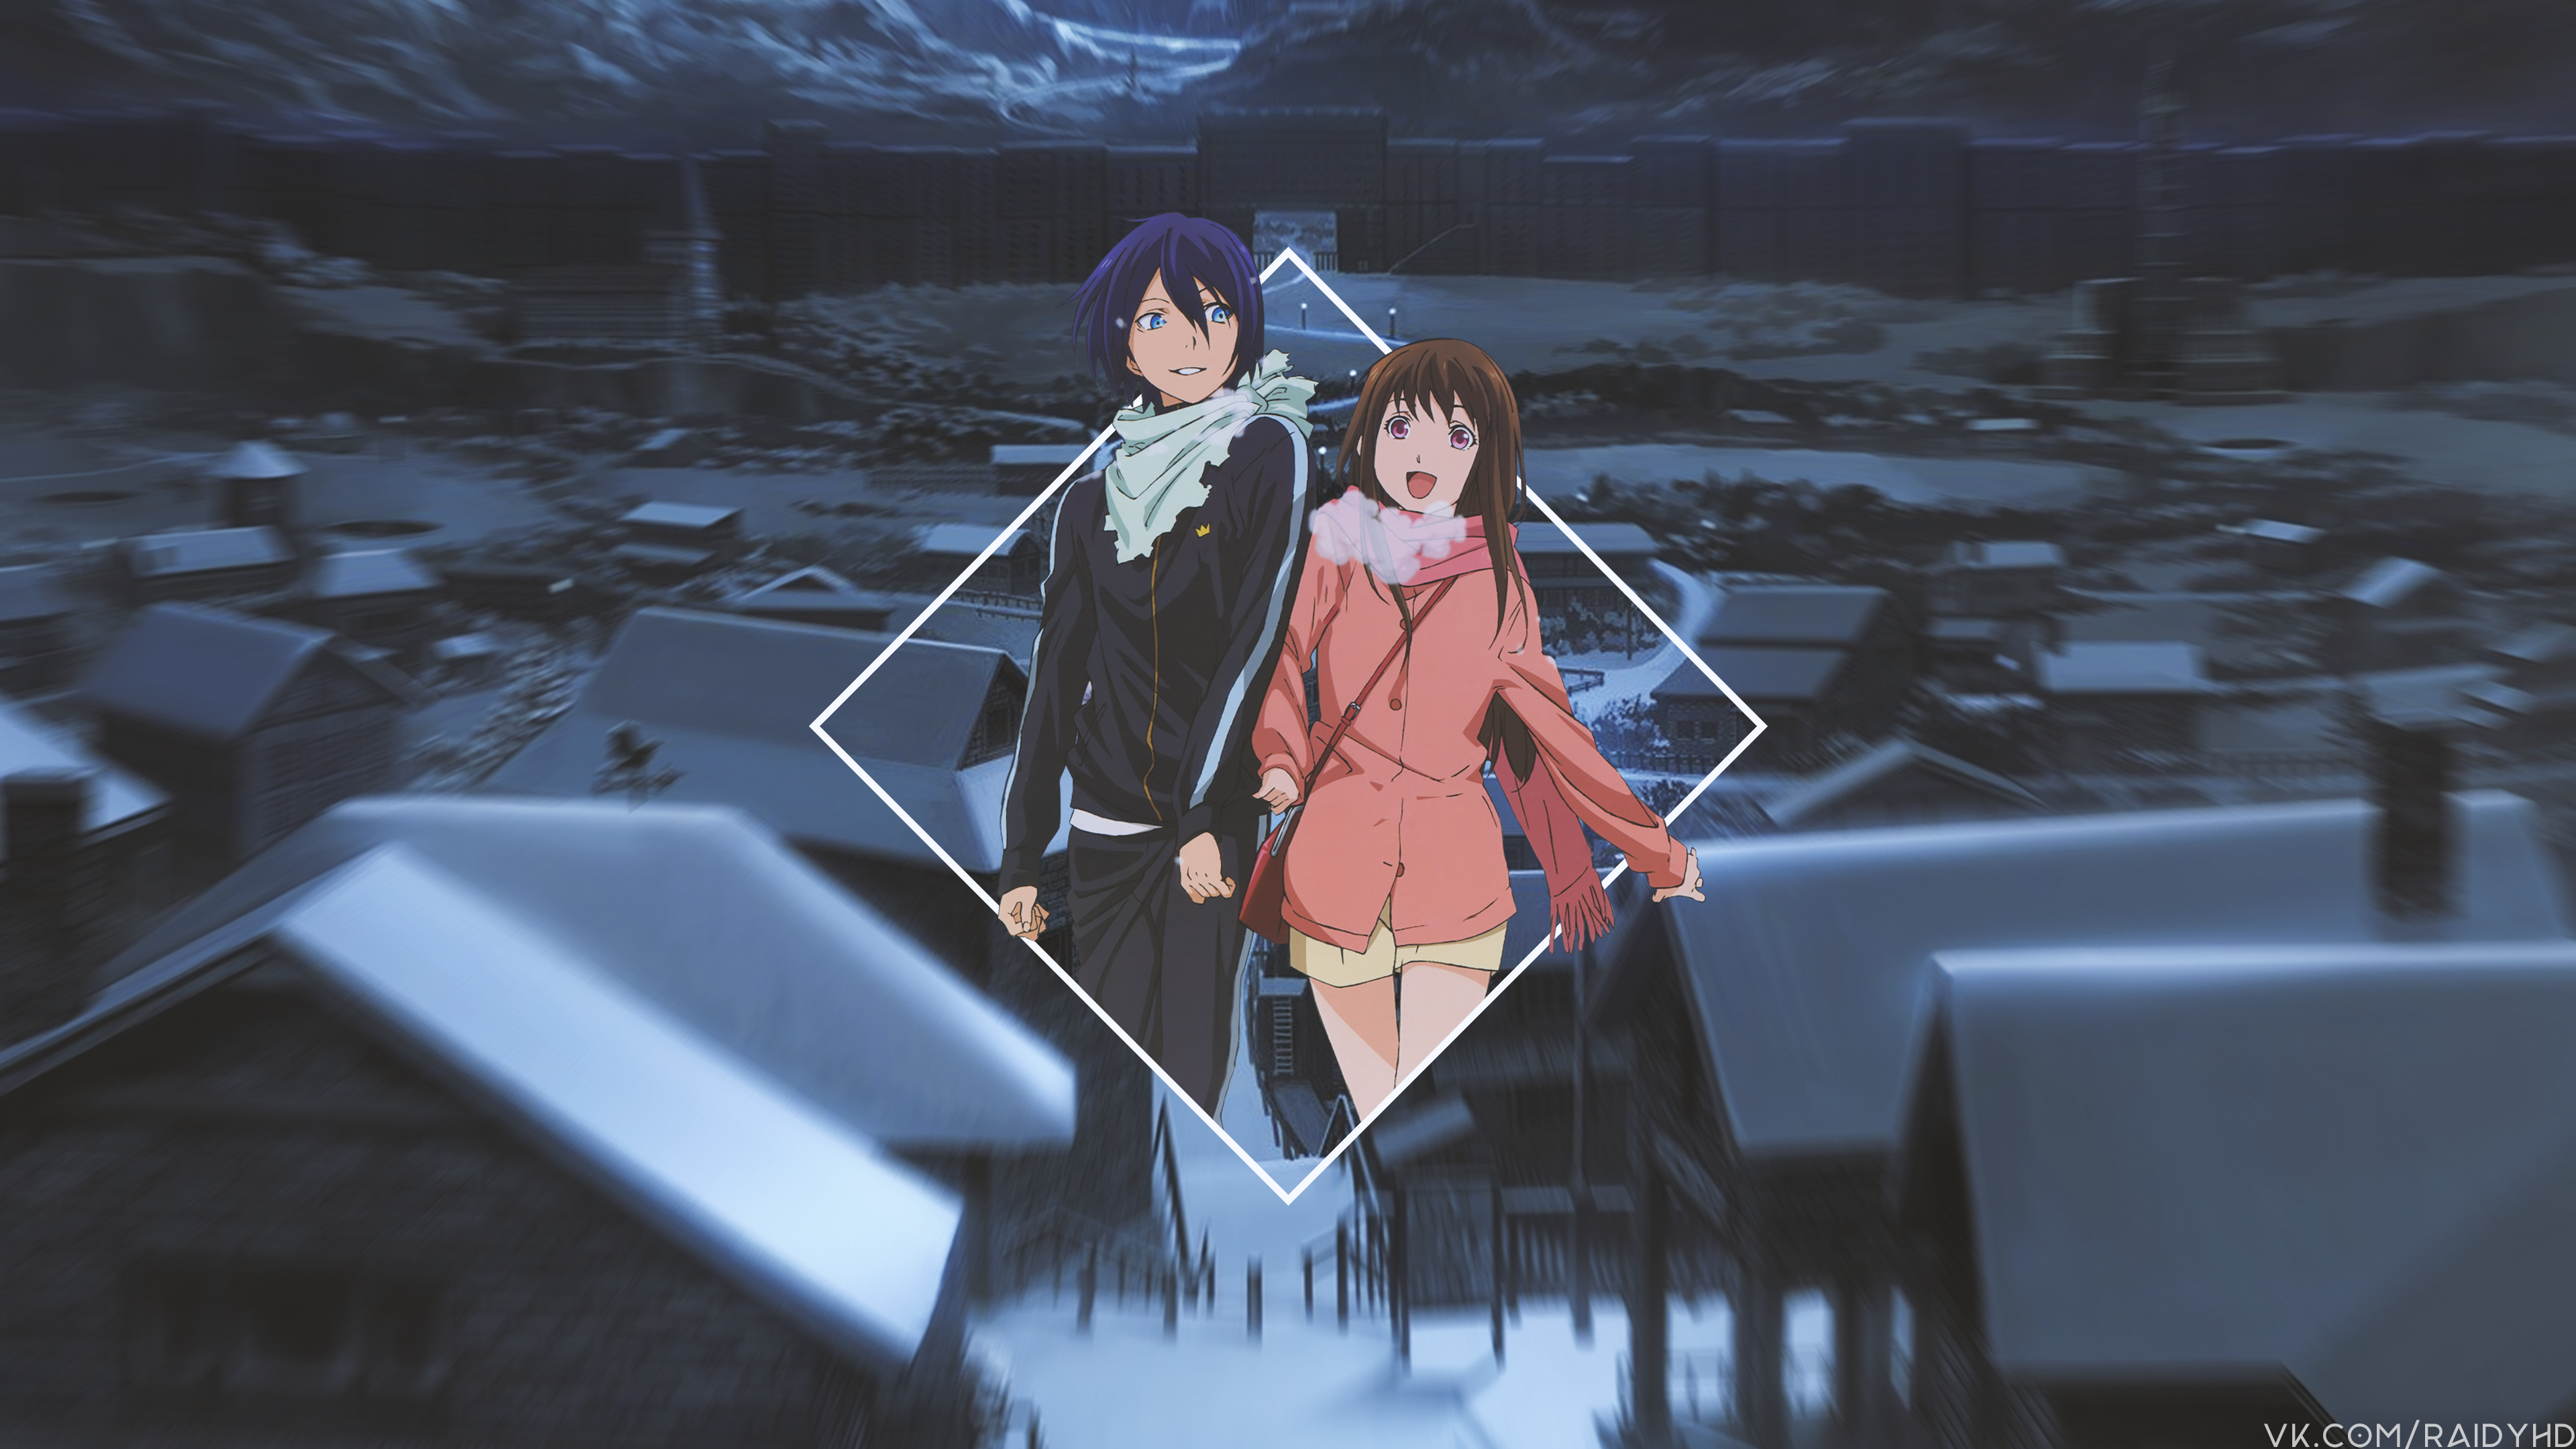 Anime 3840x2160 anime girls picture-in-picture anime anime boys Noragami Yukine (Noragami) Yato (Noragami)